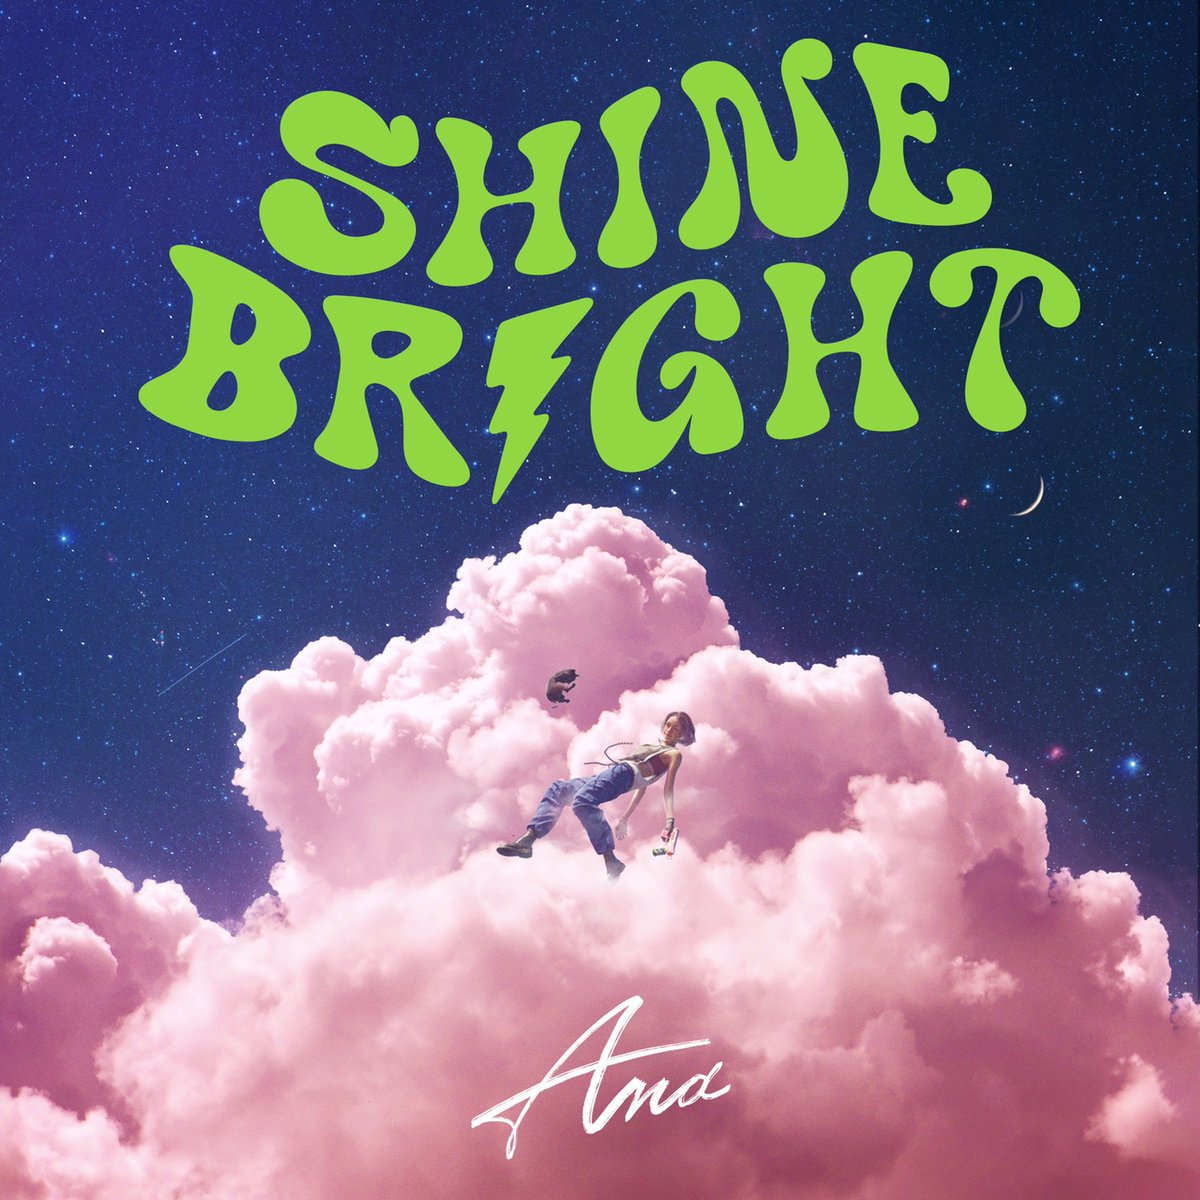 Cha Cha Malone produced Ana's single, 'SHINE BRIGHT (Prod. Cha Cha Malone),' with Krafton. Out now on all streaming platforms along with the MV! @chachamalone #ChaChaMalone #차차말론 #Ana #애나 #SHINEBRIGHT #KRAFTON #크래프톤 #H1GHRMUSIC #하이어뮤직